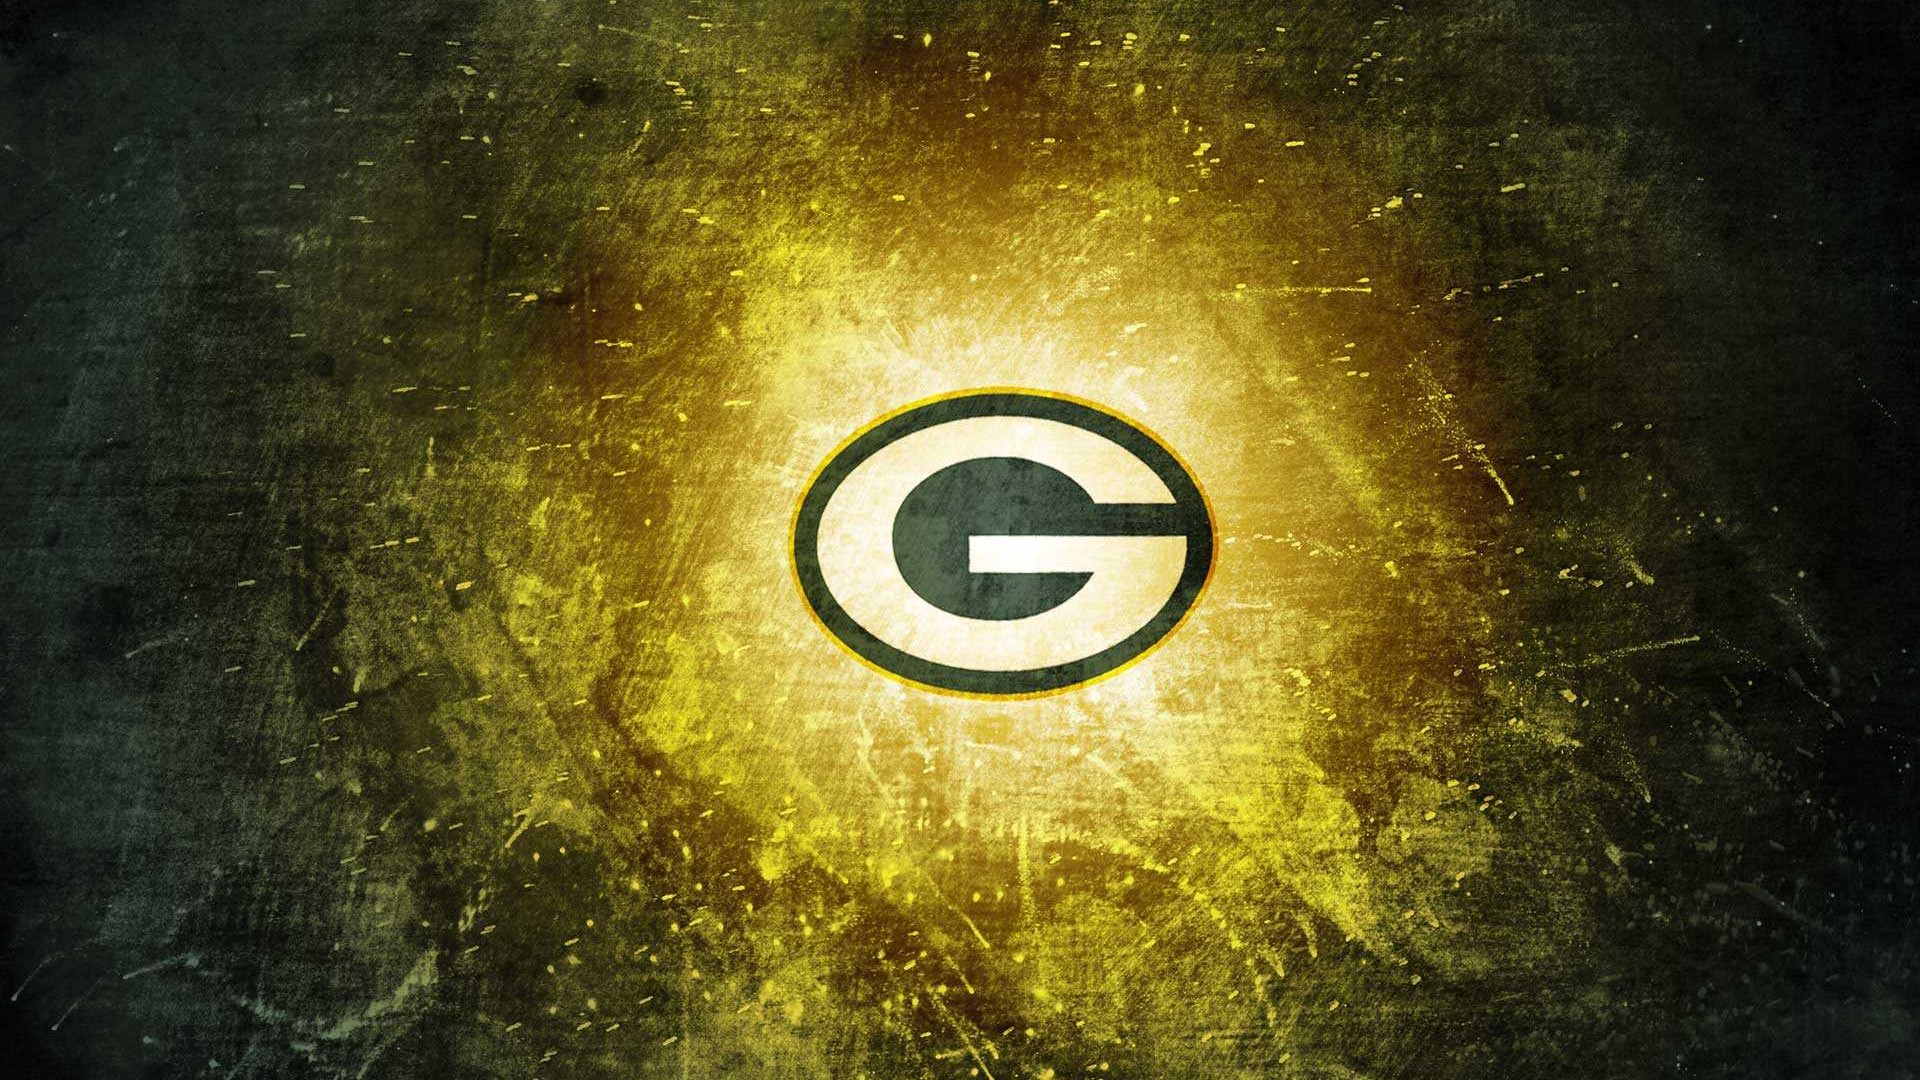 Green Bay Packers NFL Wallpaper HD With Resolution 1920X1080 pixel. You can make this wallpaper for your Mac or Windows Desktop Background, iPhone, Android or Tablet and another Smartphone device for free